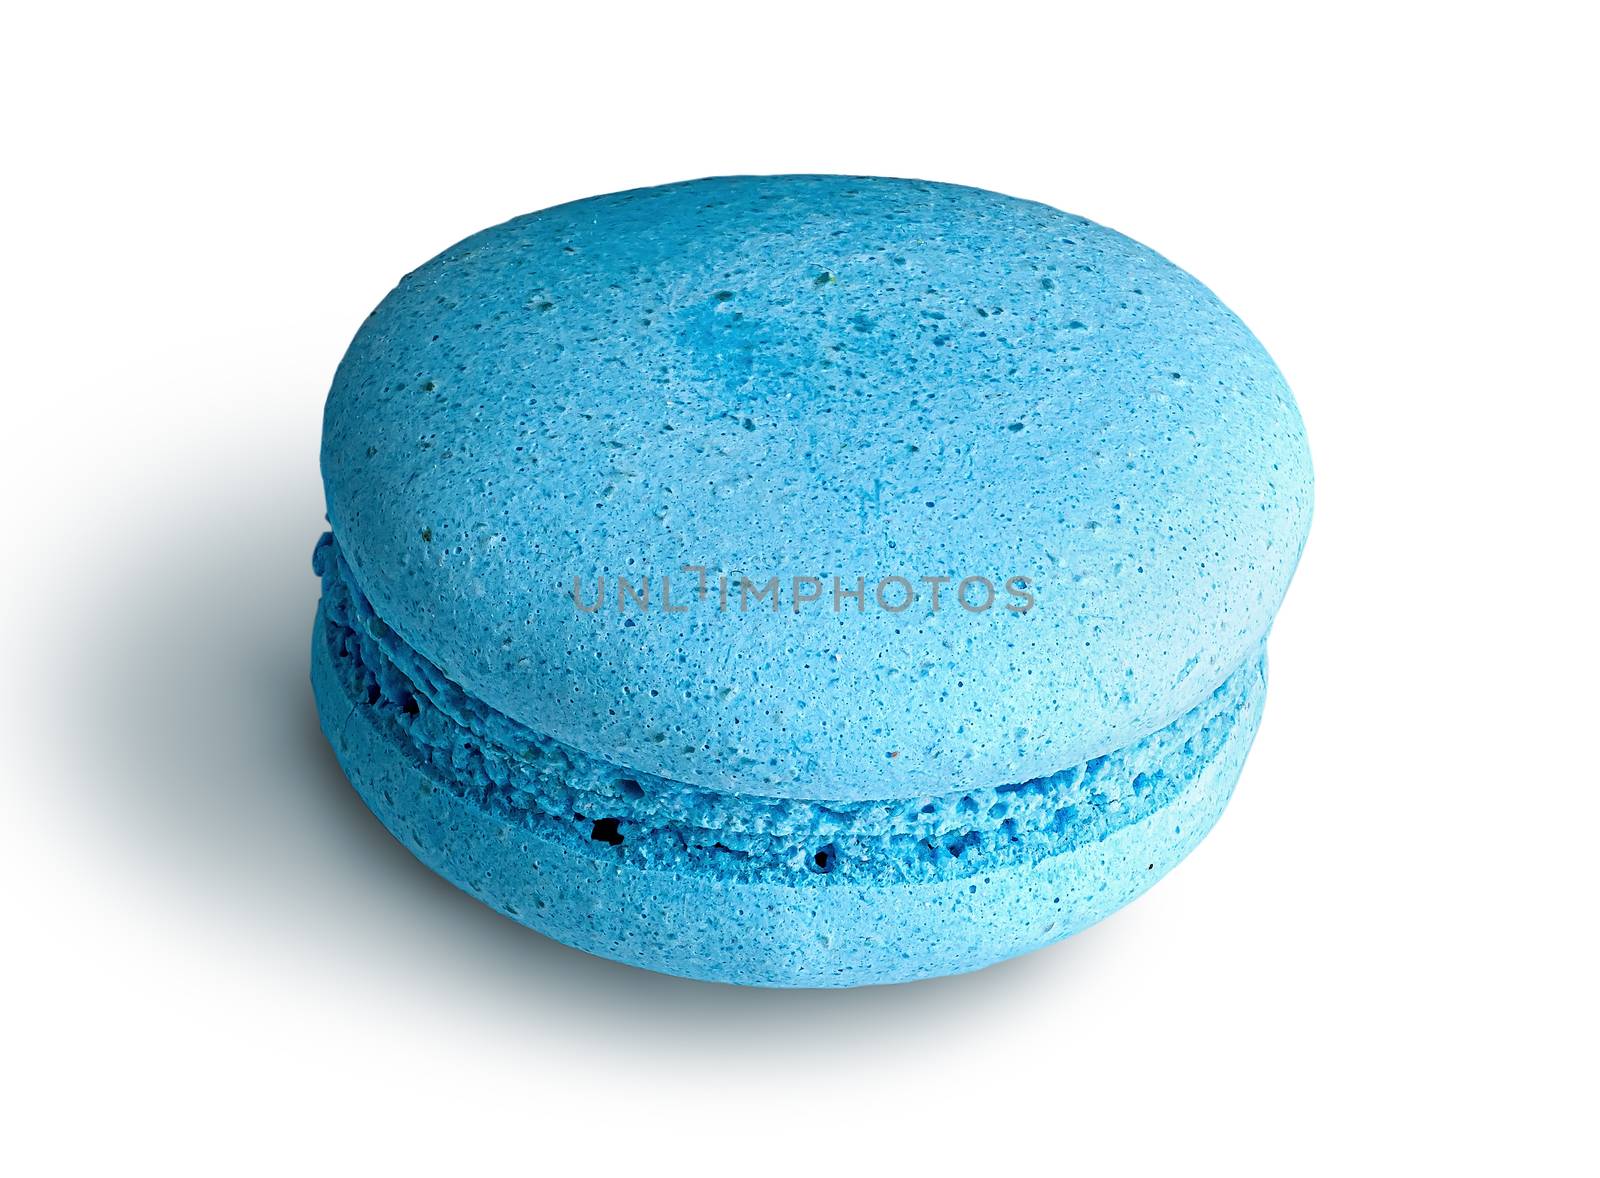 One blue macaroon angled view isolated on a white background